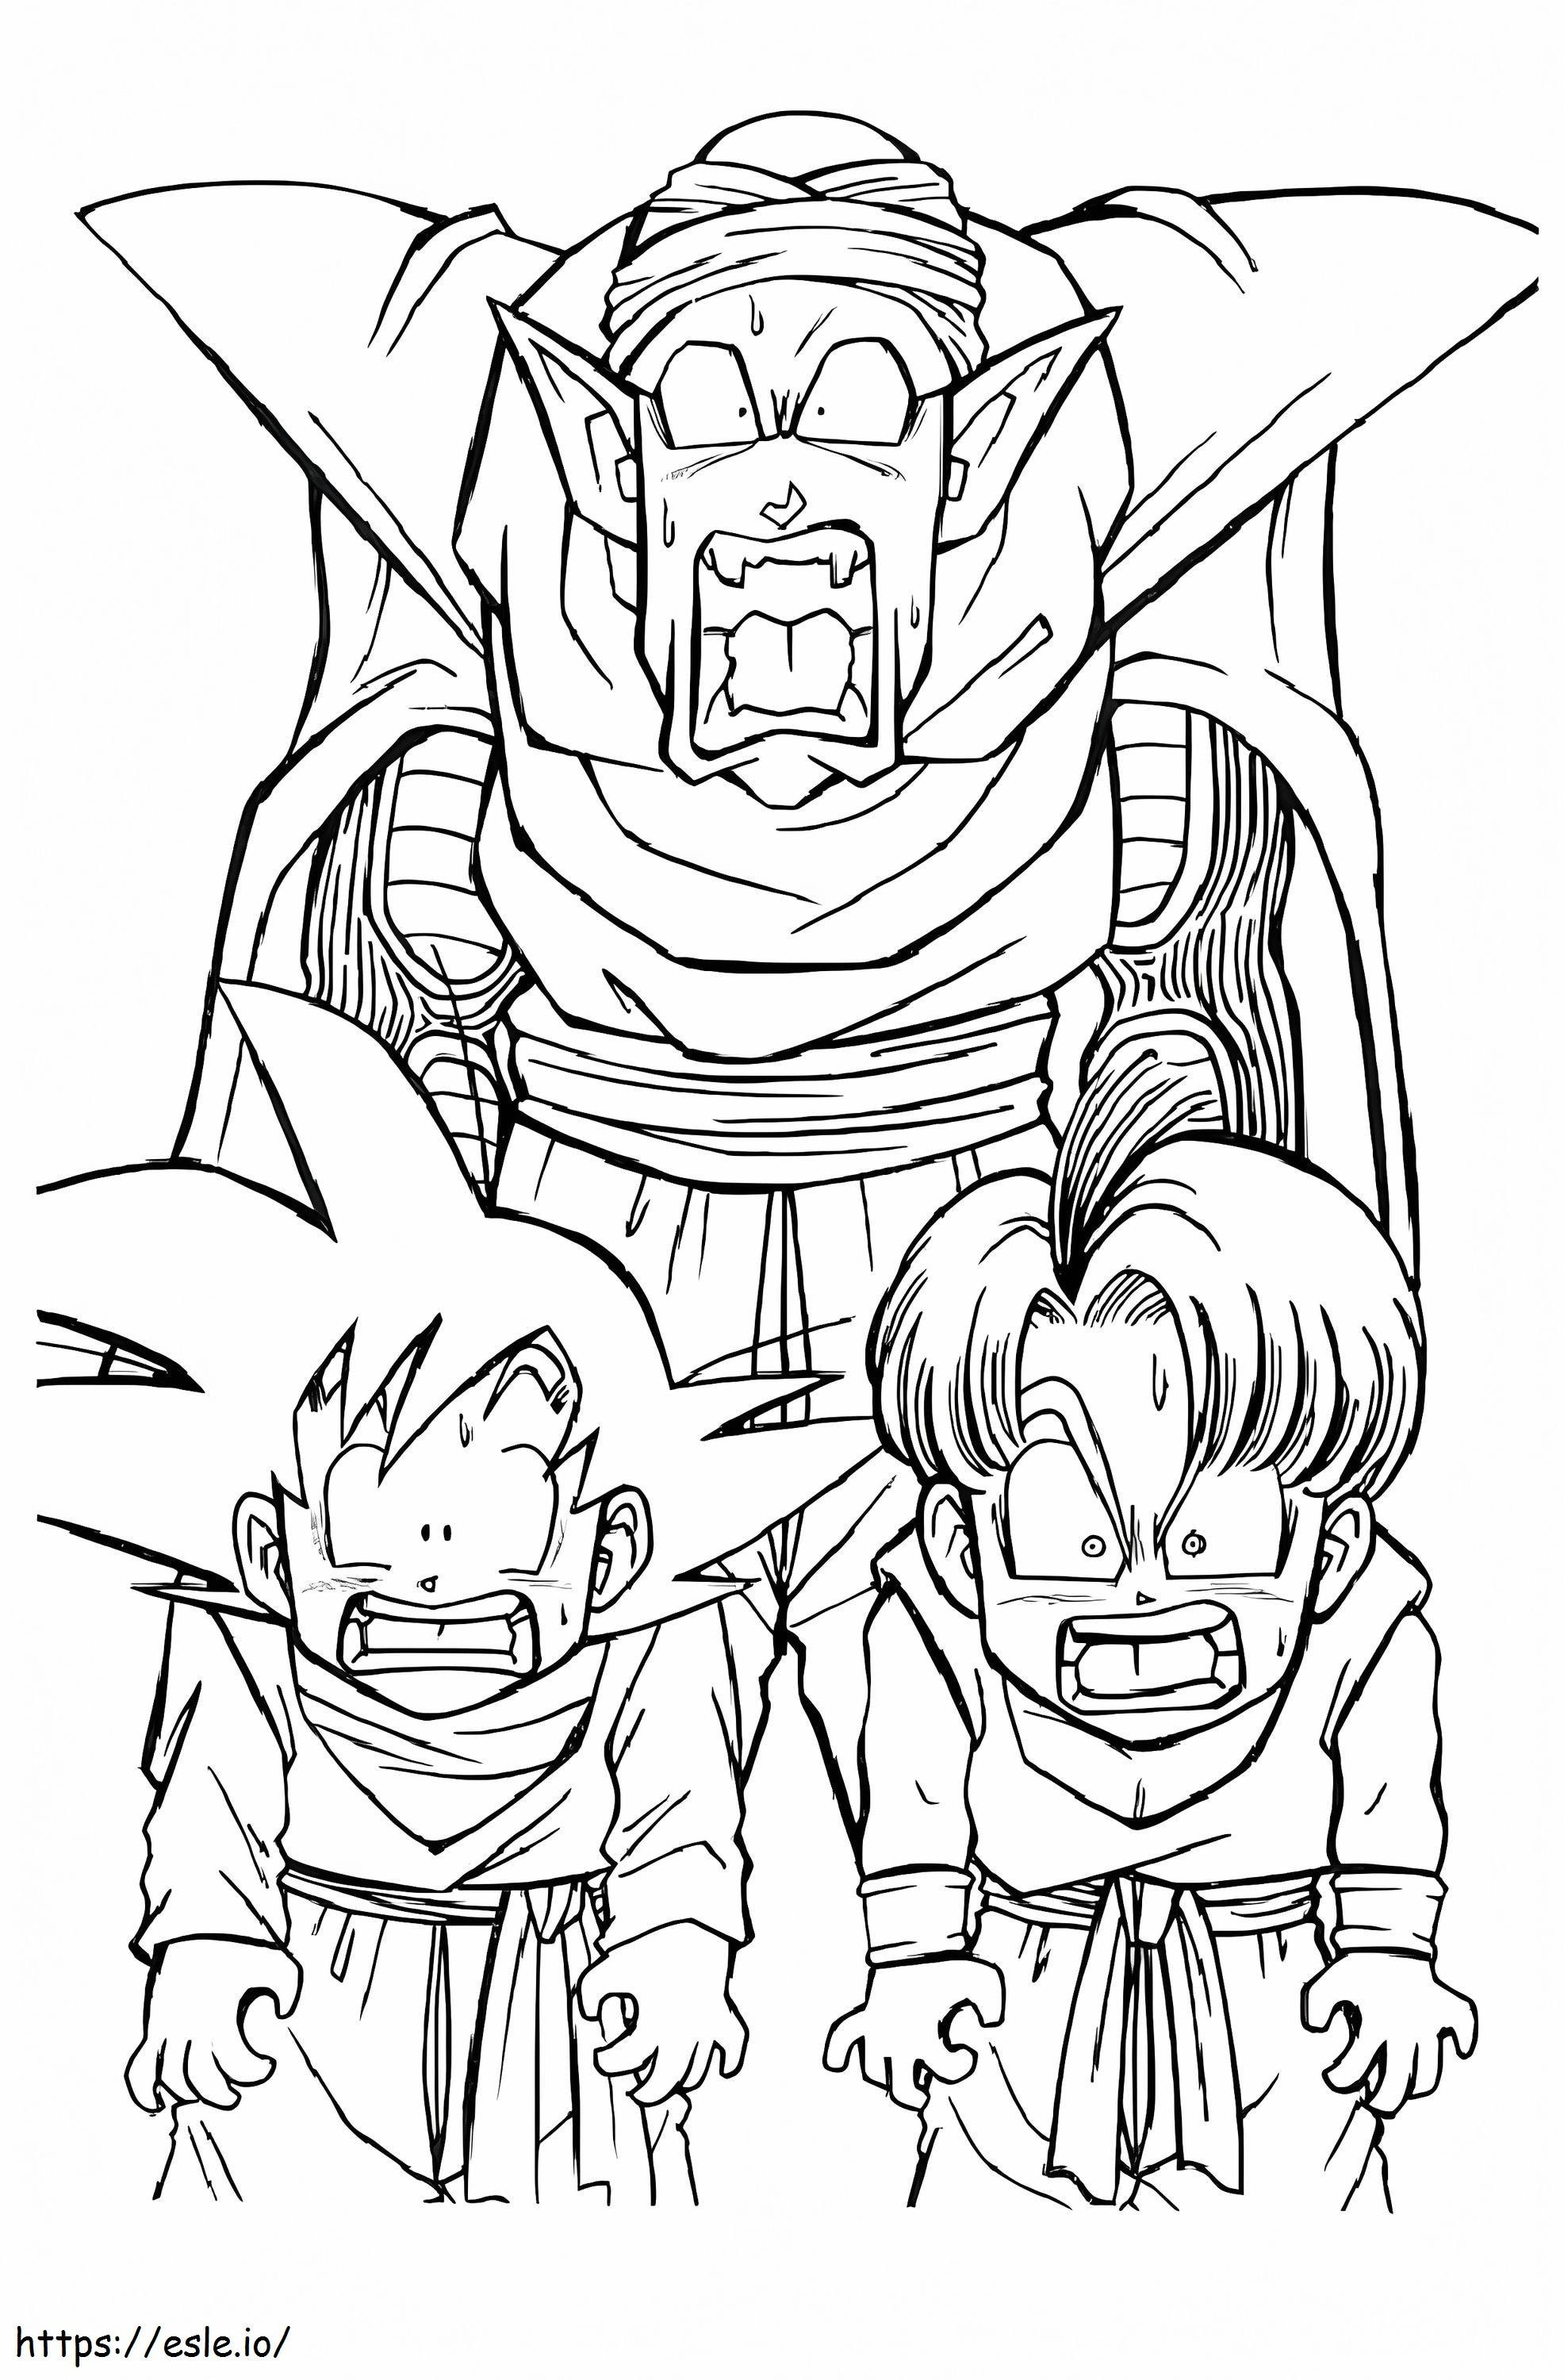 Dragon Ball Z Characters coloring page